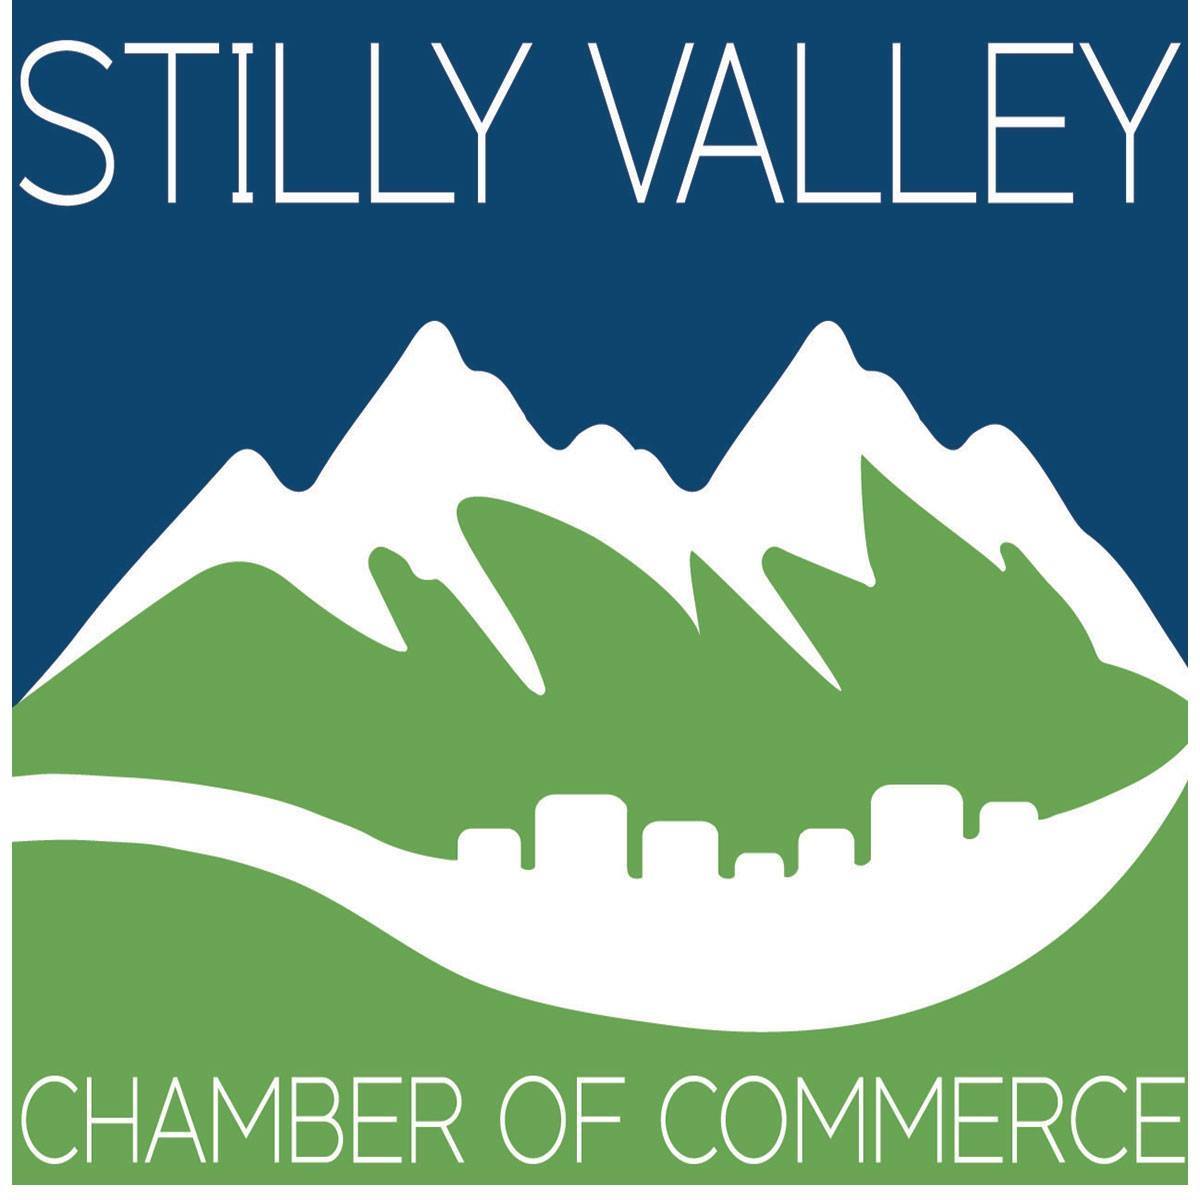 Stilly Valley Chamber of Commerce